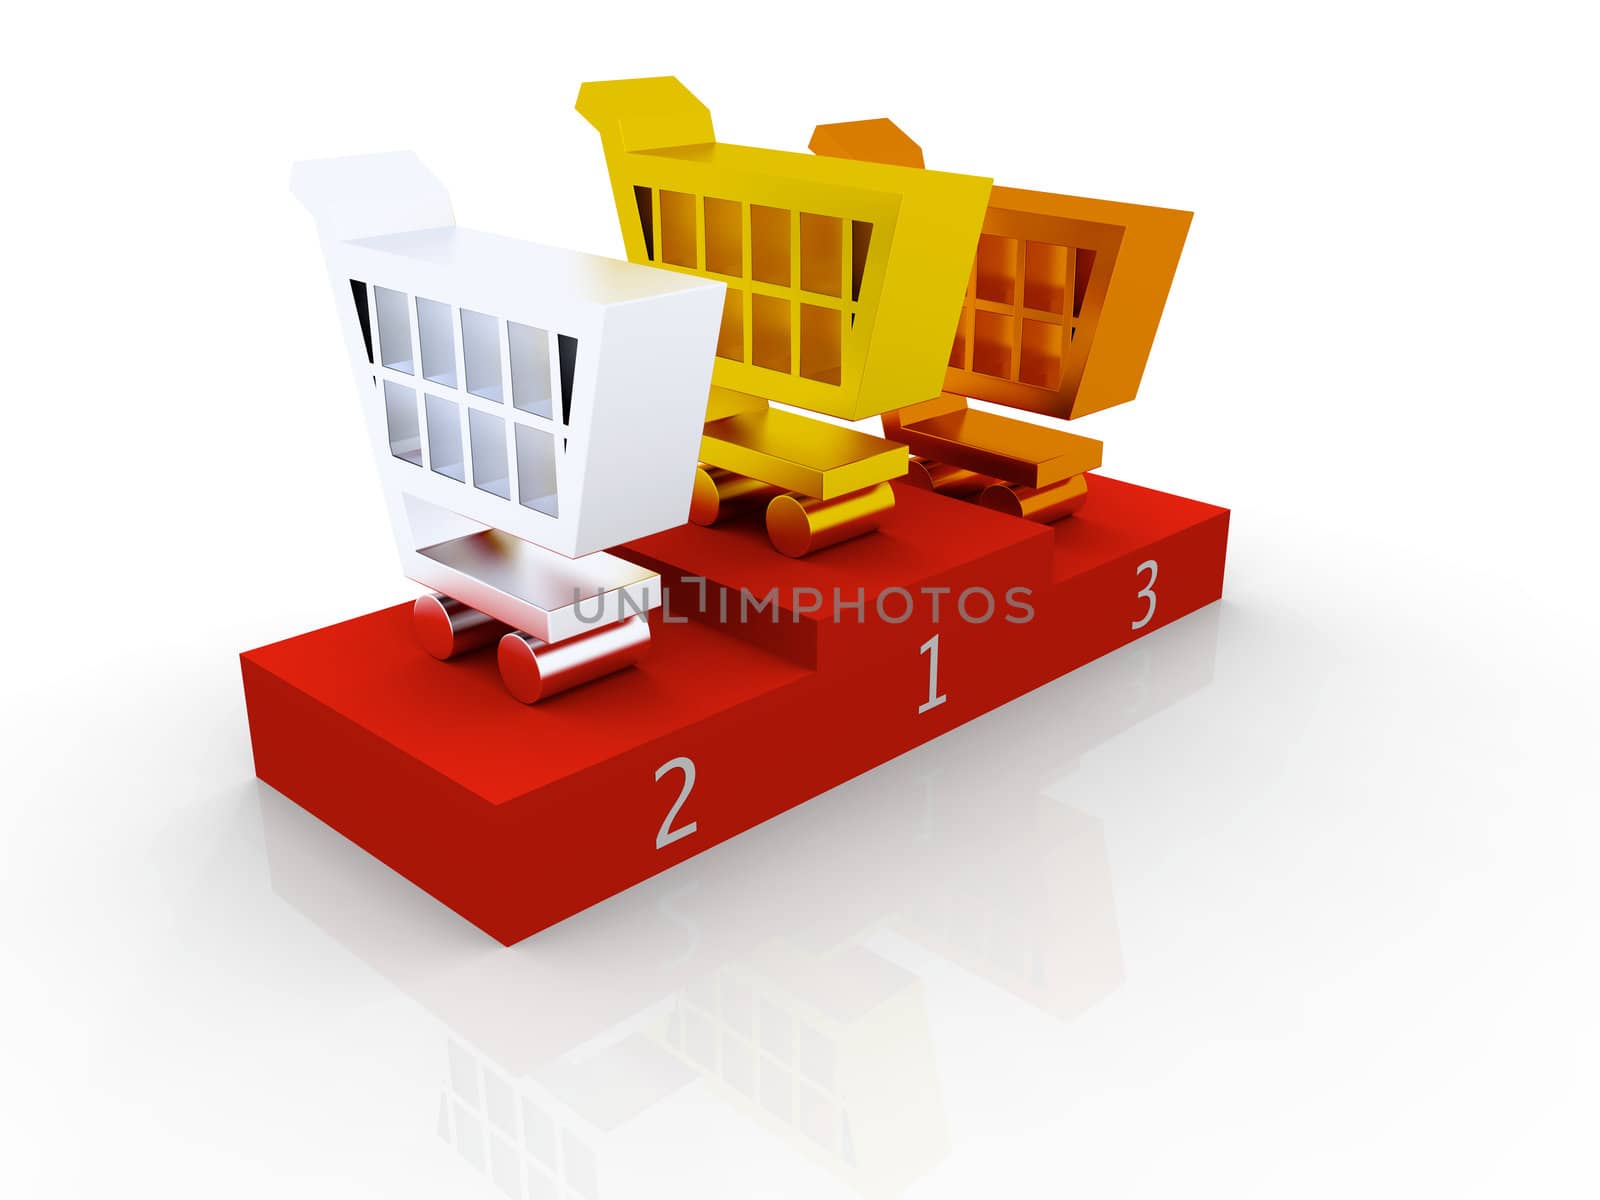 3D illustration of shopping trolley symbols as top three contestants